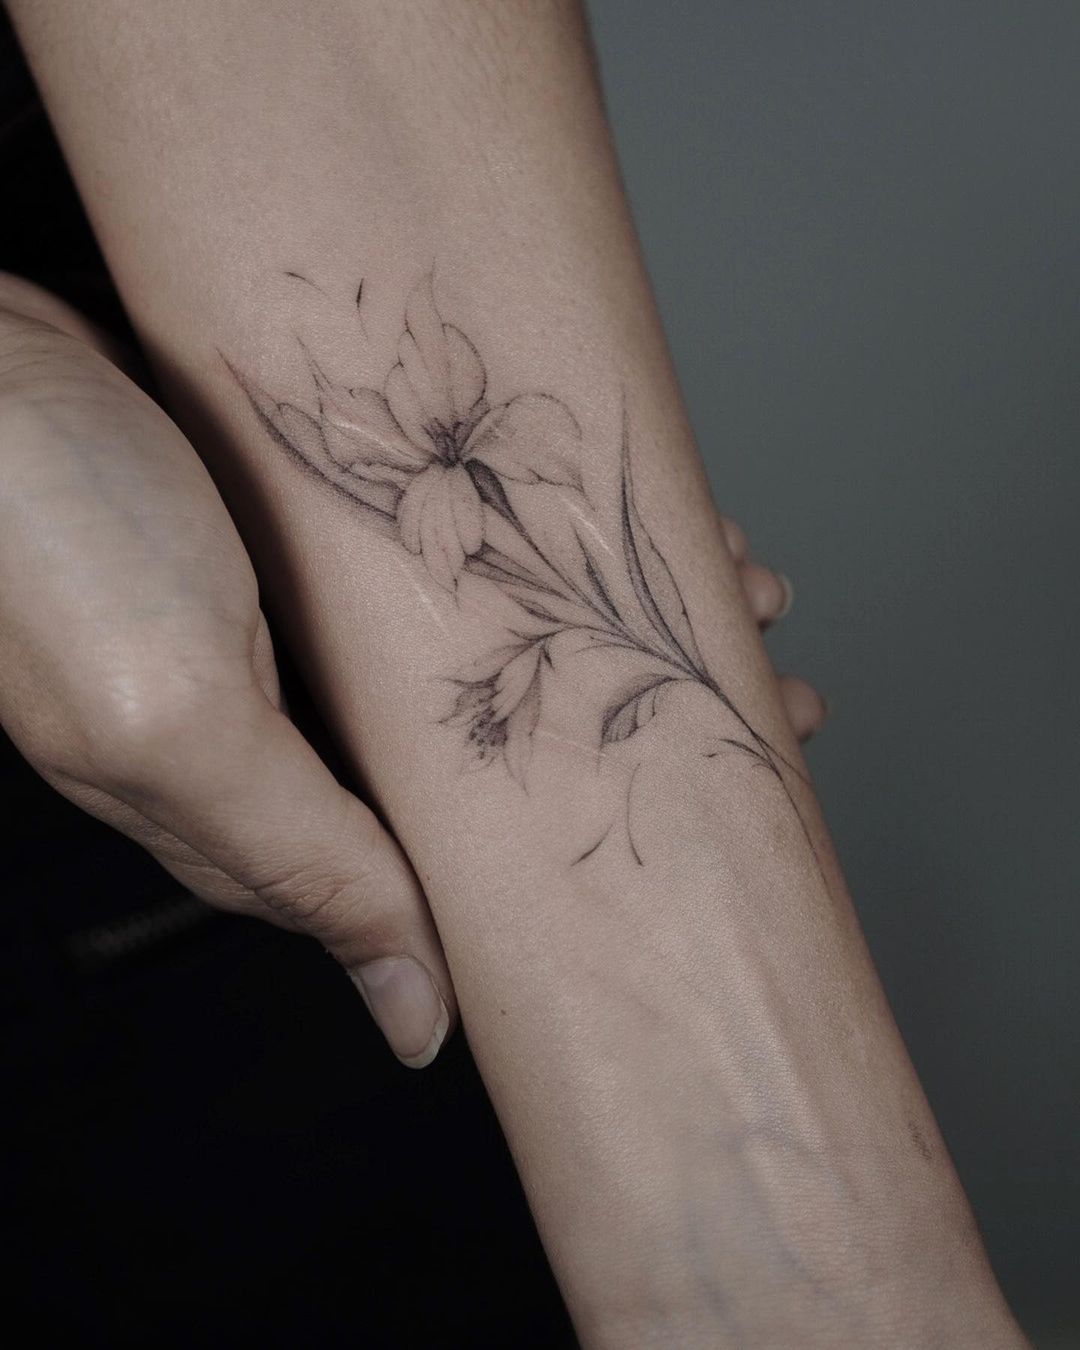 beautiful flower tattoo on the forearm of a woman